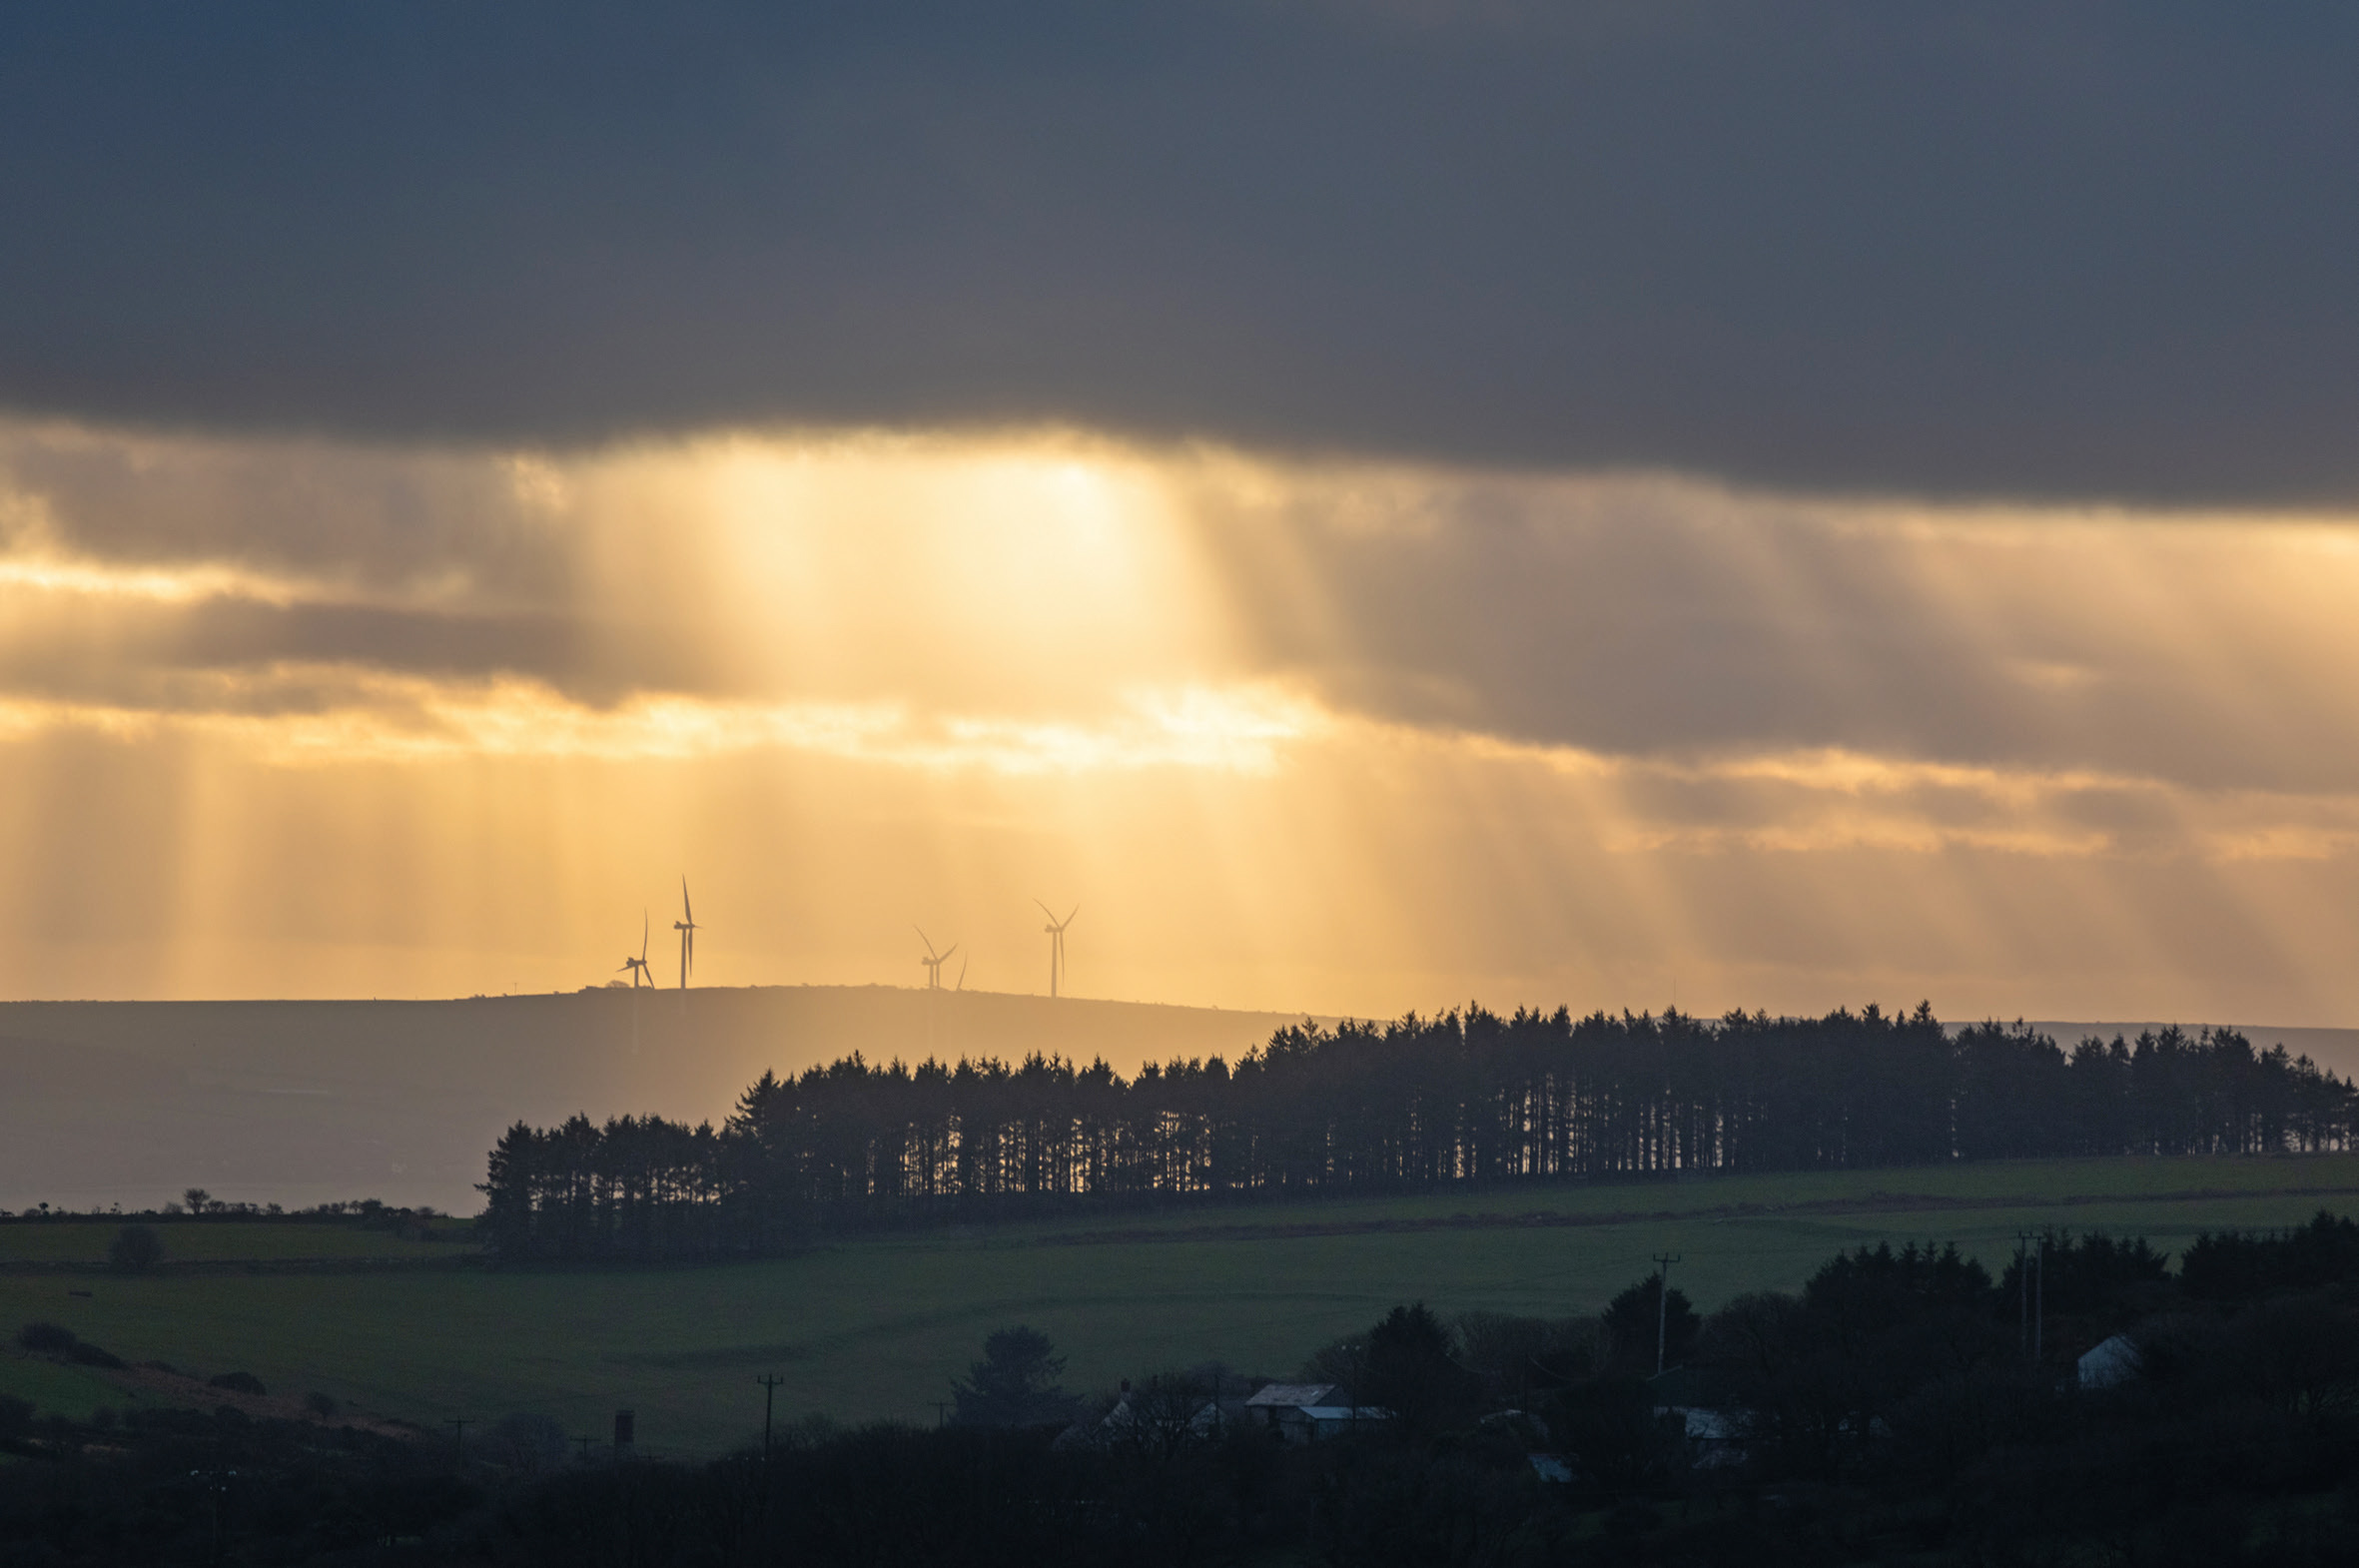 For this image of the sun’s rays shining through the clouds we metered for the highlights and then used Lightroom to boost the shadow detail. Nikon 70-300mm f/4.5-5.6E ED VR AF-P, 1/500sec at f/5.6, ISO 200